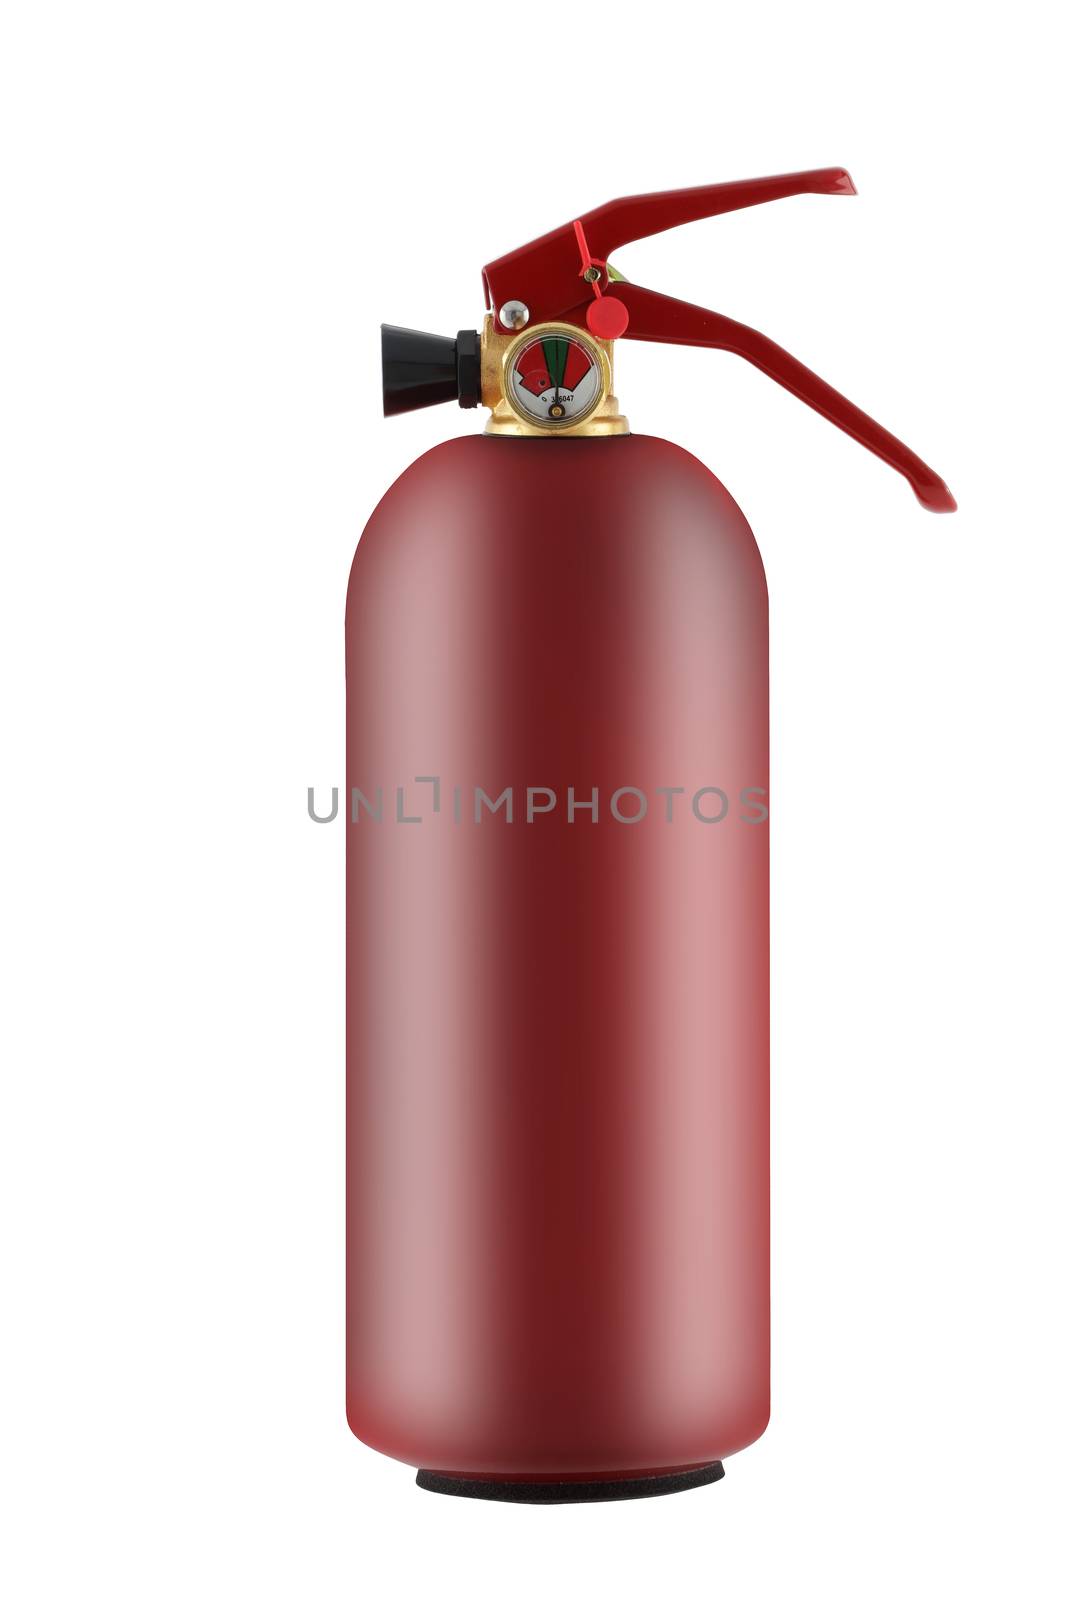 A fire extinguisher 1kg showing pressure gauge isolated on white with clipping path